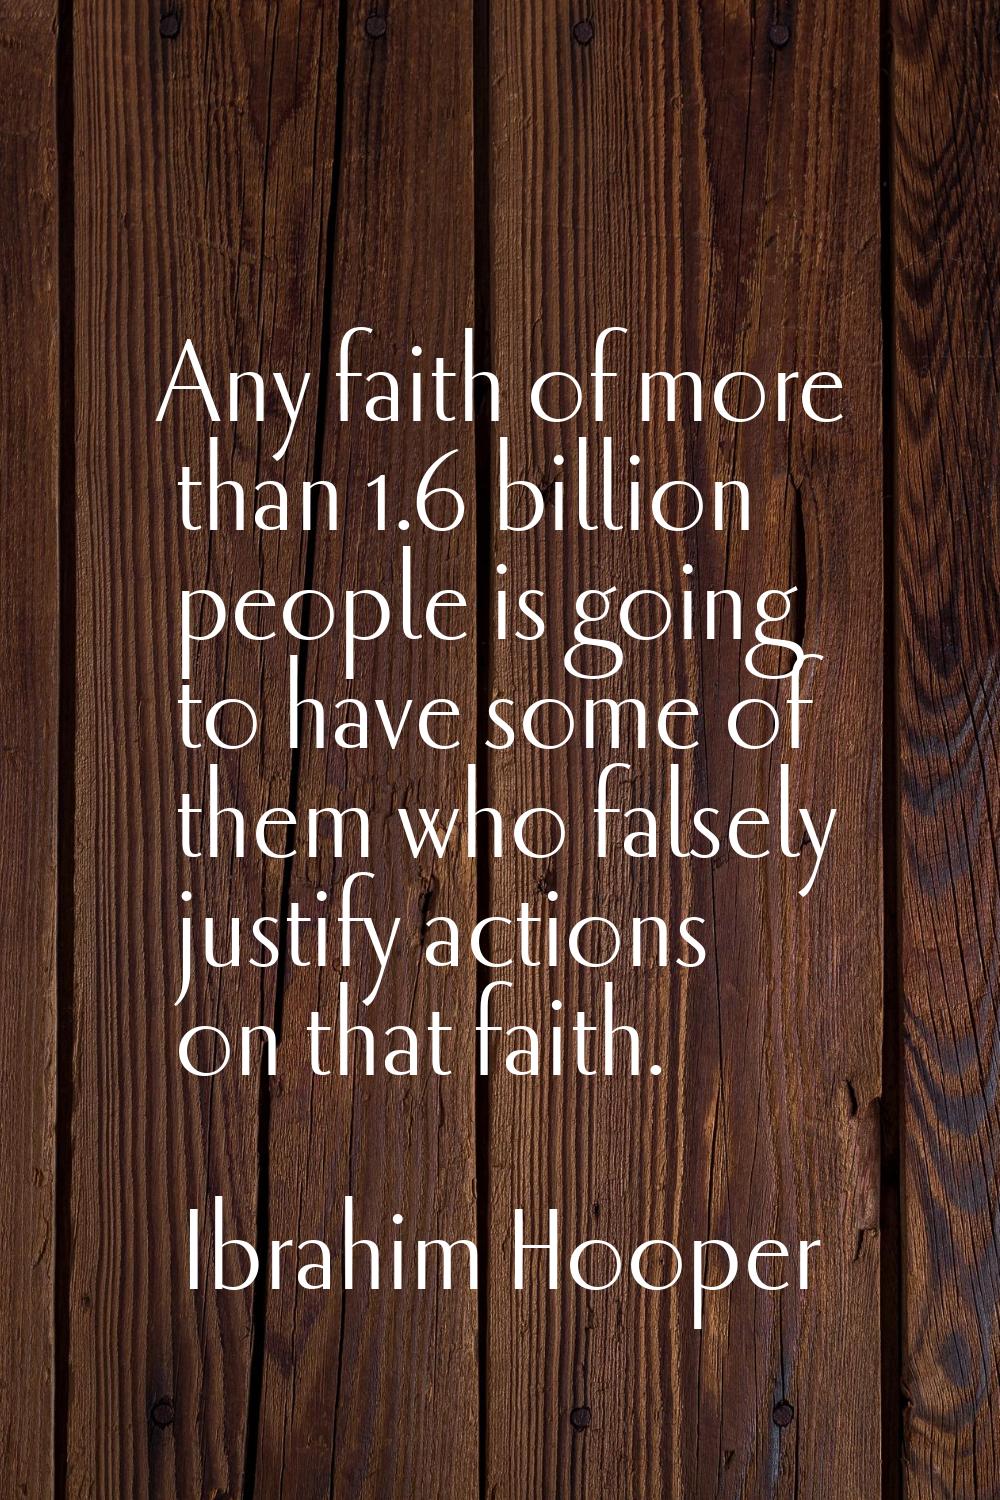 Any faith of more than 1.6 billion people is going to have some of them who falsely justify actions